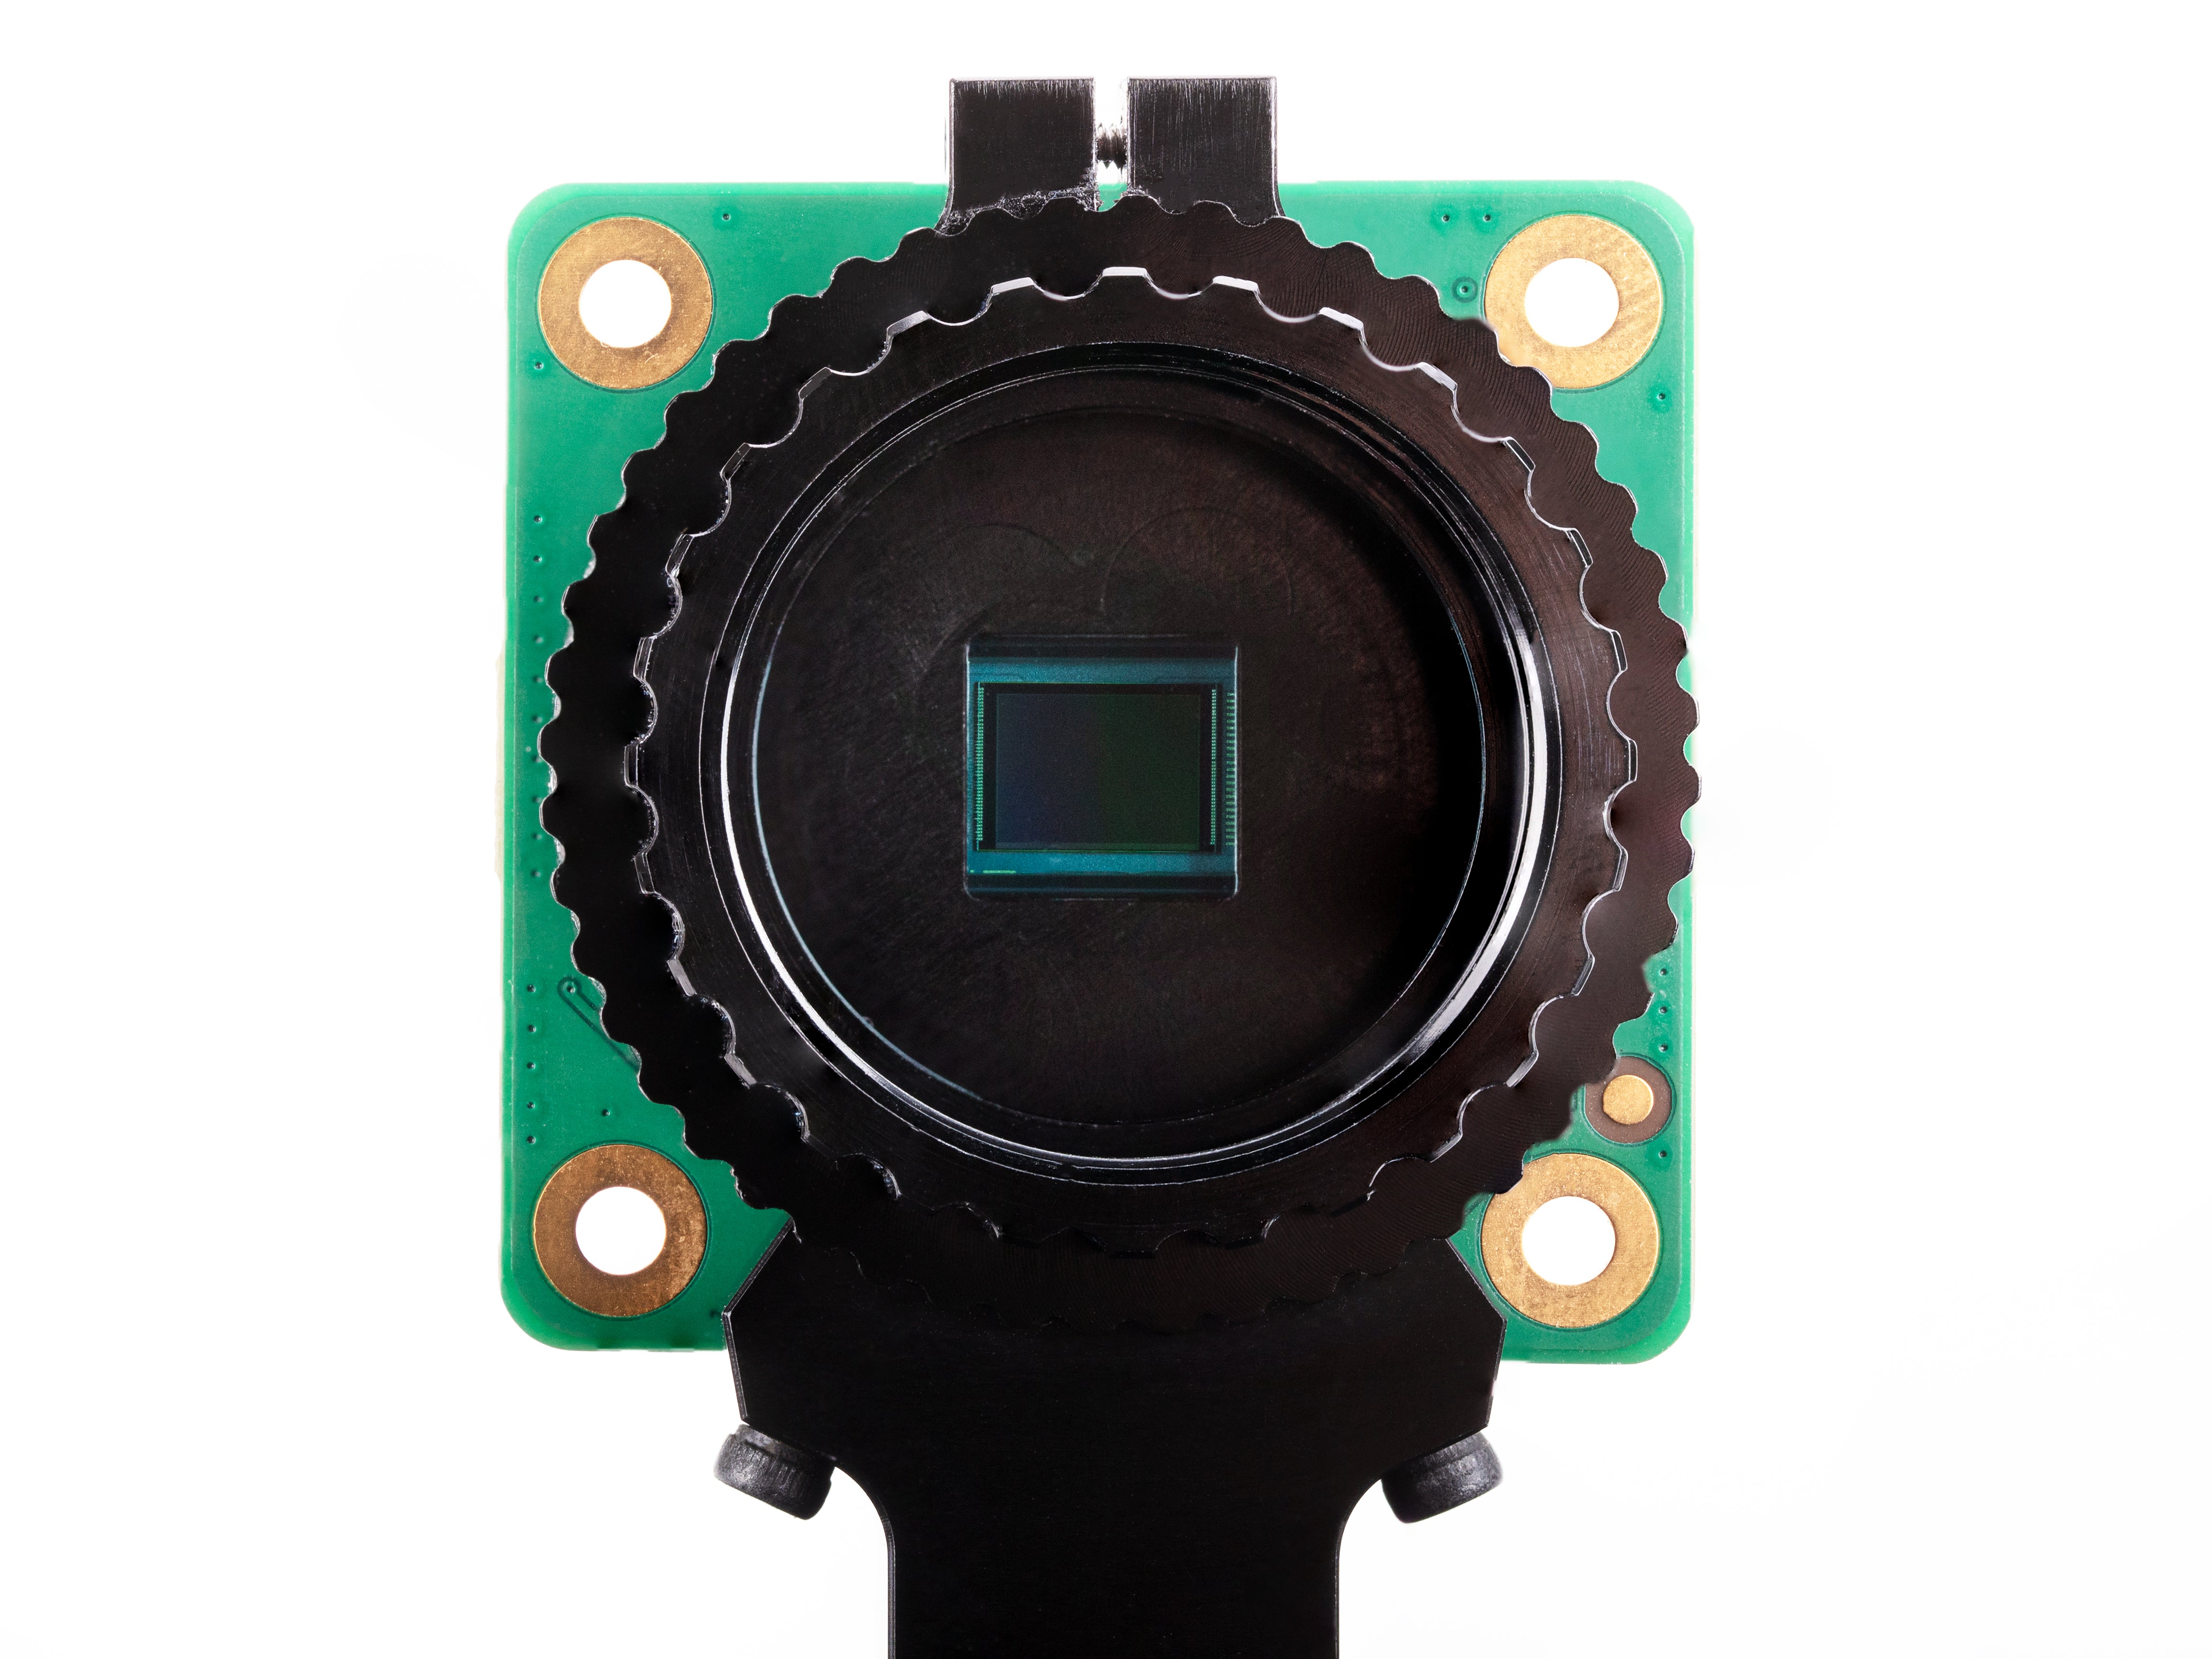 Official Raspberry Pi HQ Camera Bundle With 16mm Lens